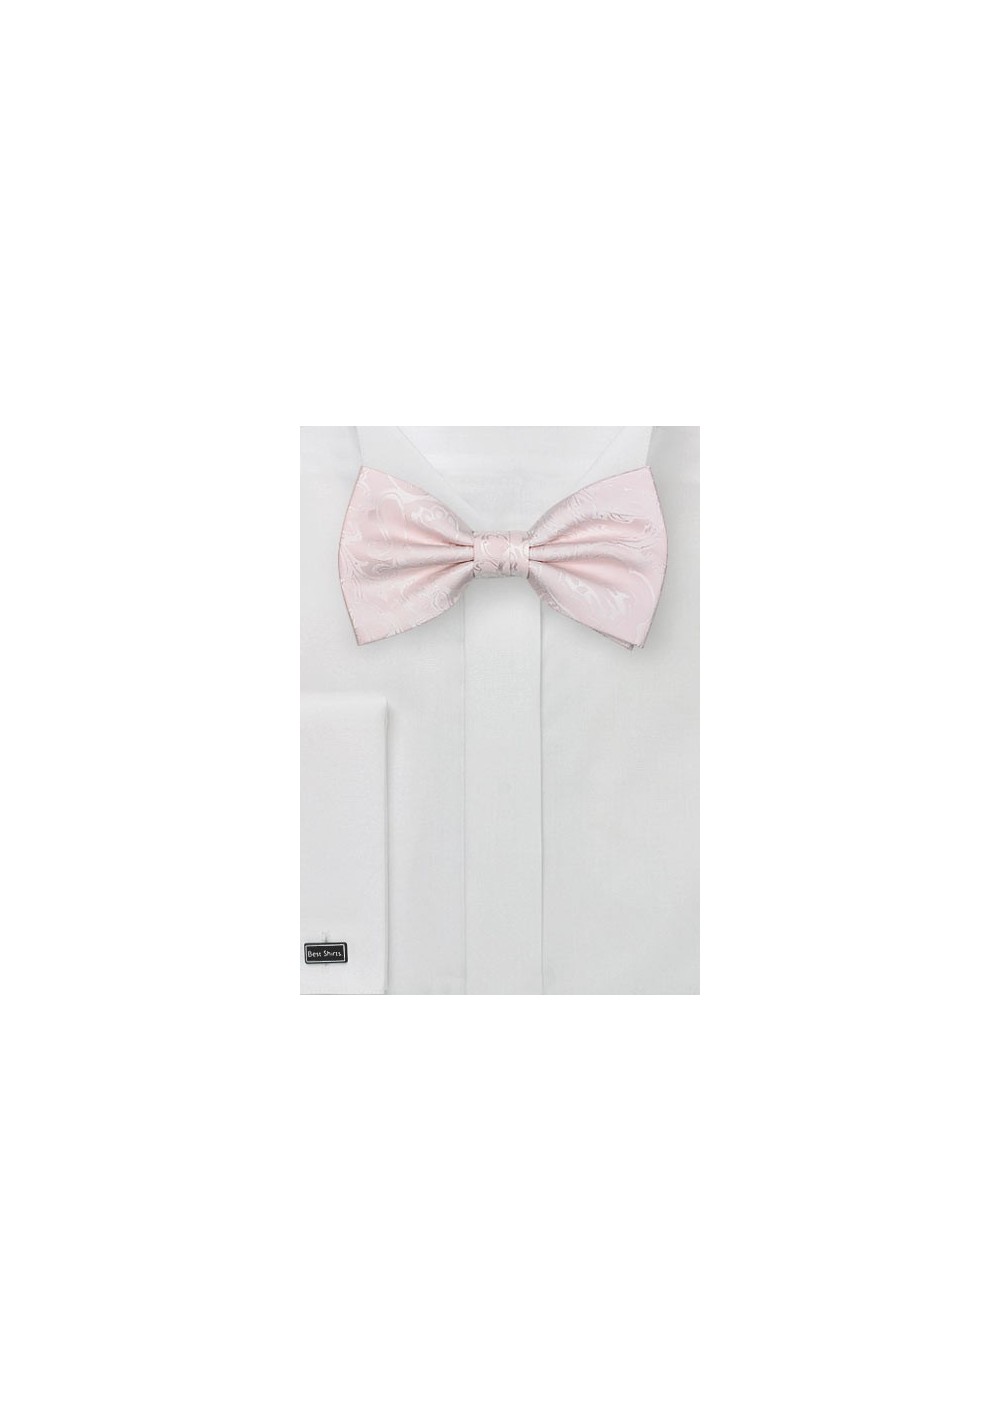 Blush Pink Paisley Bow Tie